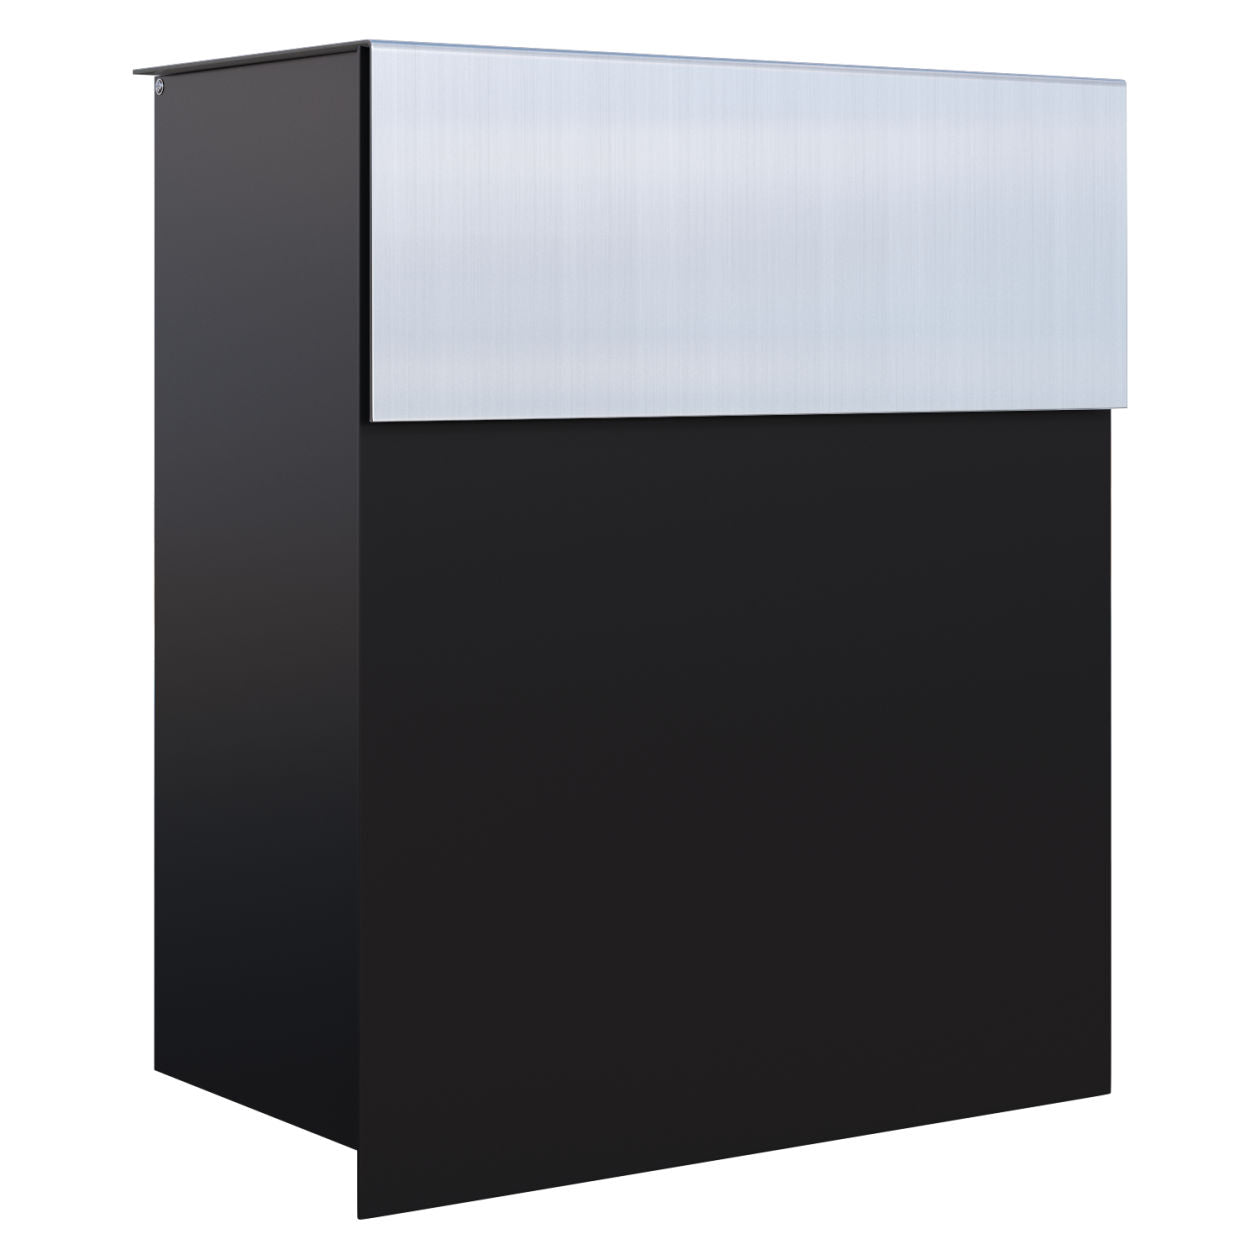 ALTO by Bravios - Modern wall-mounted black mailbox with stainless steel flap